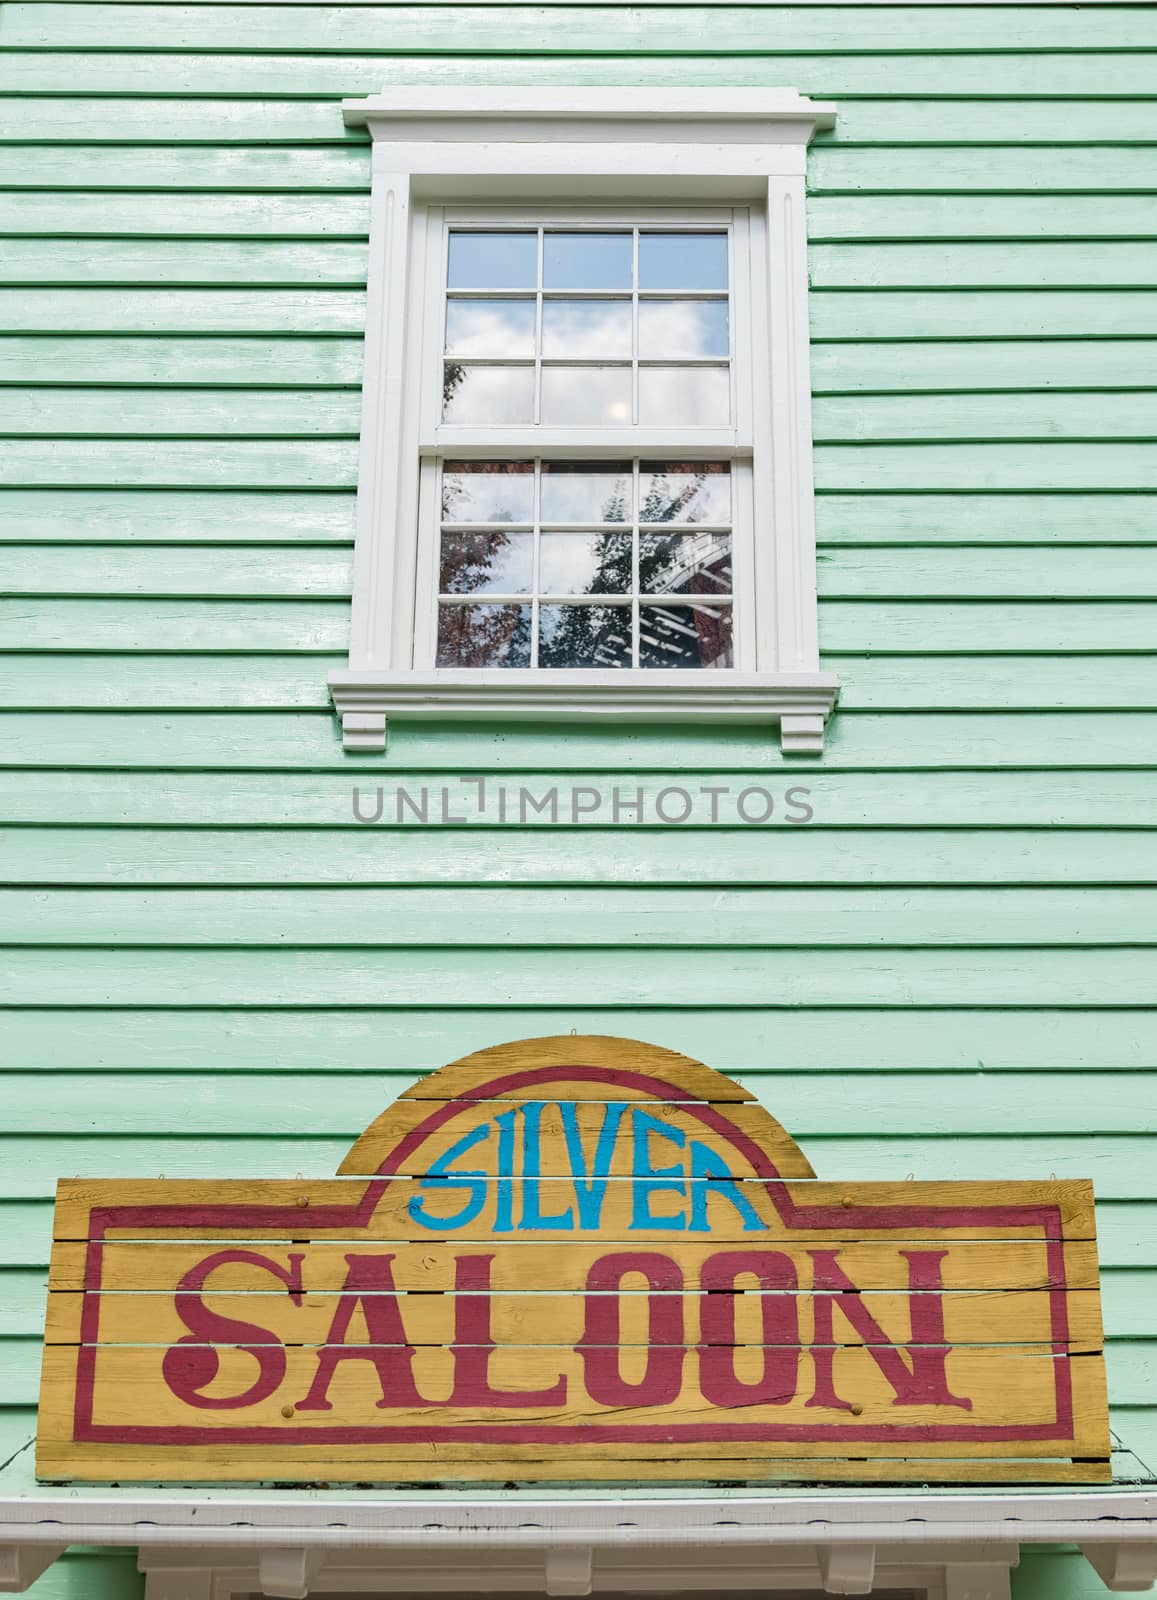 Detail of the facade of a saloon painted green with white windows.